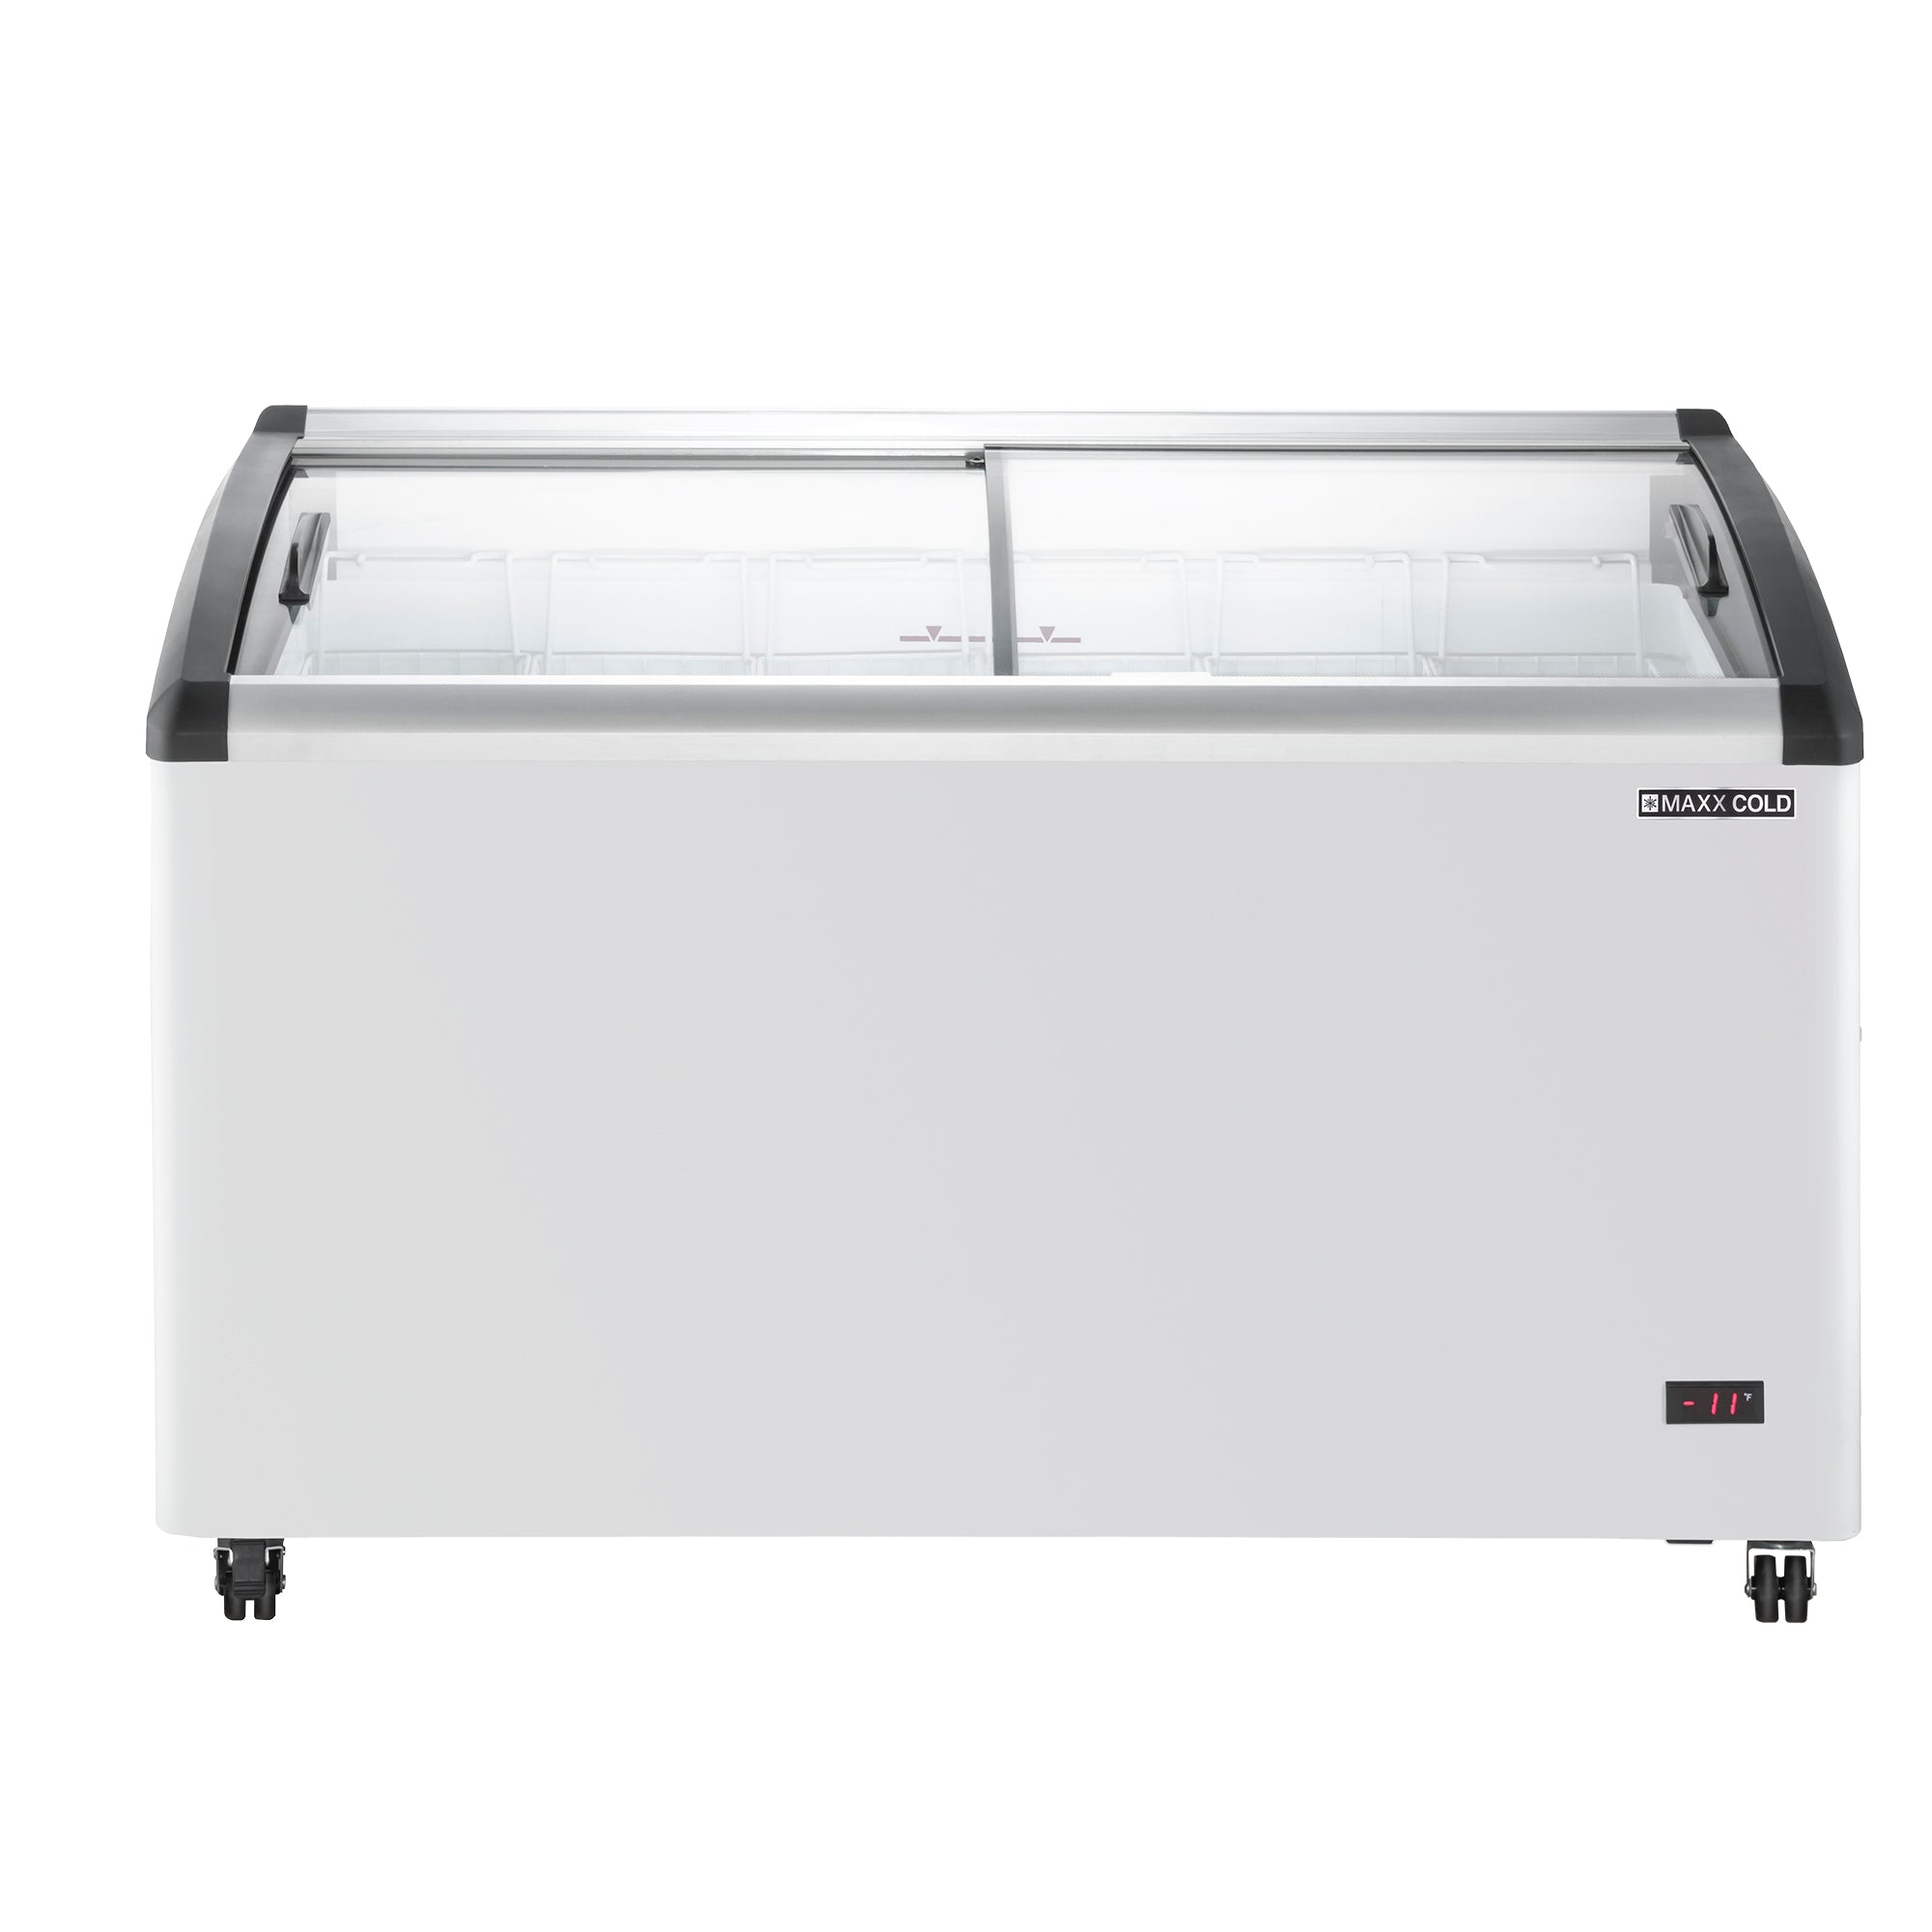 Maxx Cold - MXF54CHC-6, Maxx Cold Curved Glass Top Chest Freezer Display, 53.2"W, 9.96 cu. ft. Storage Capacity, Equipped with (6) Wire Baskets, in White